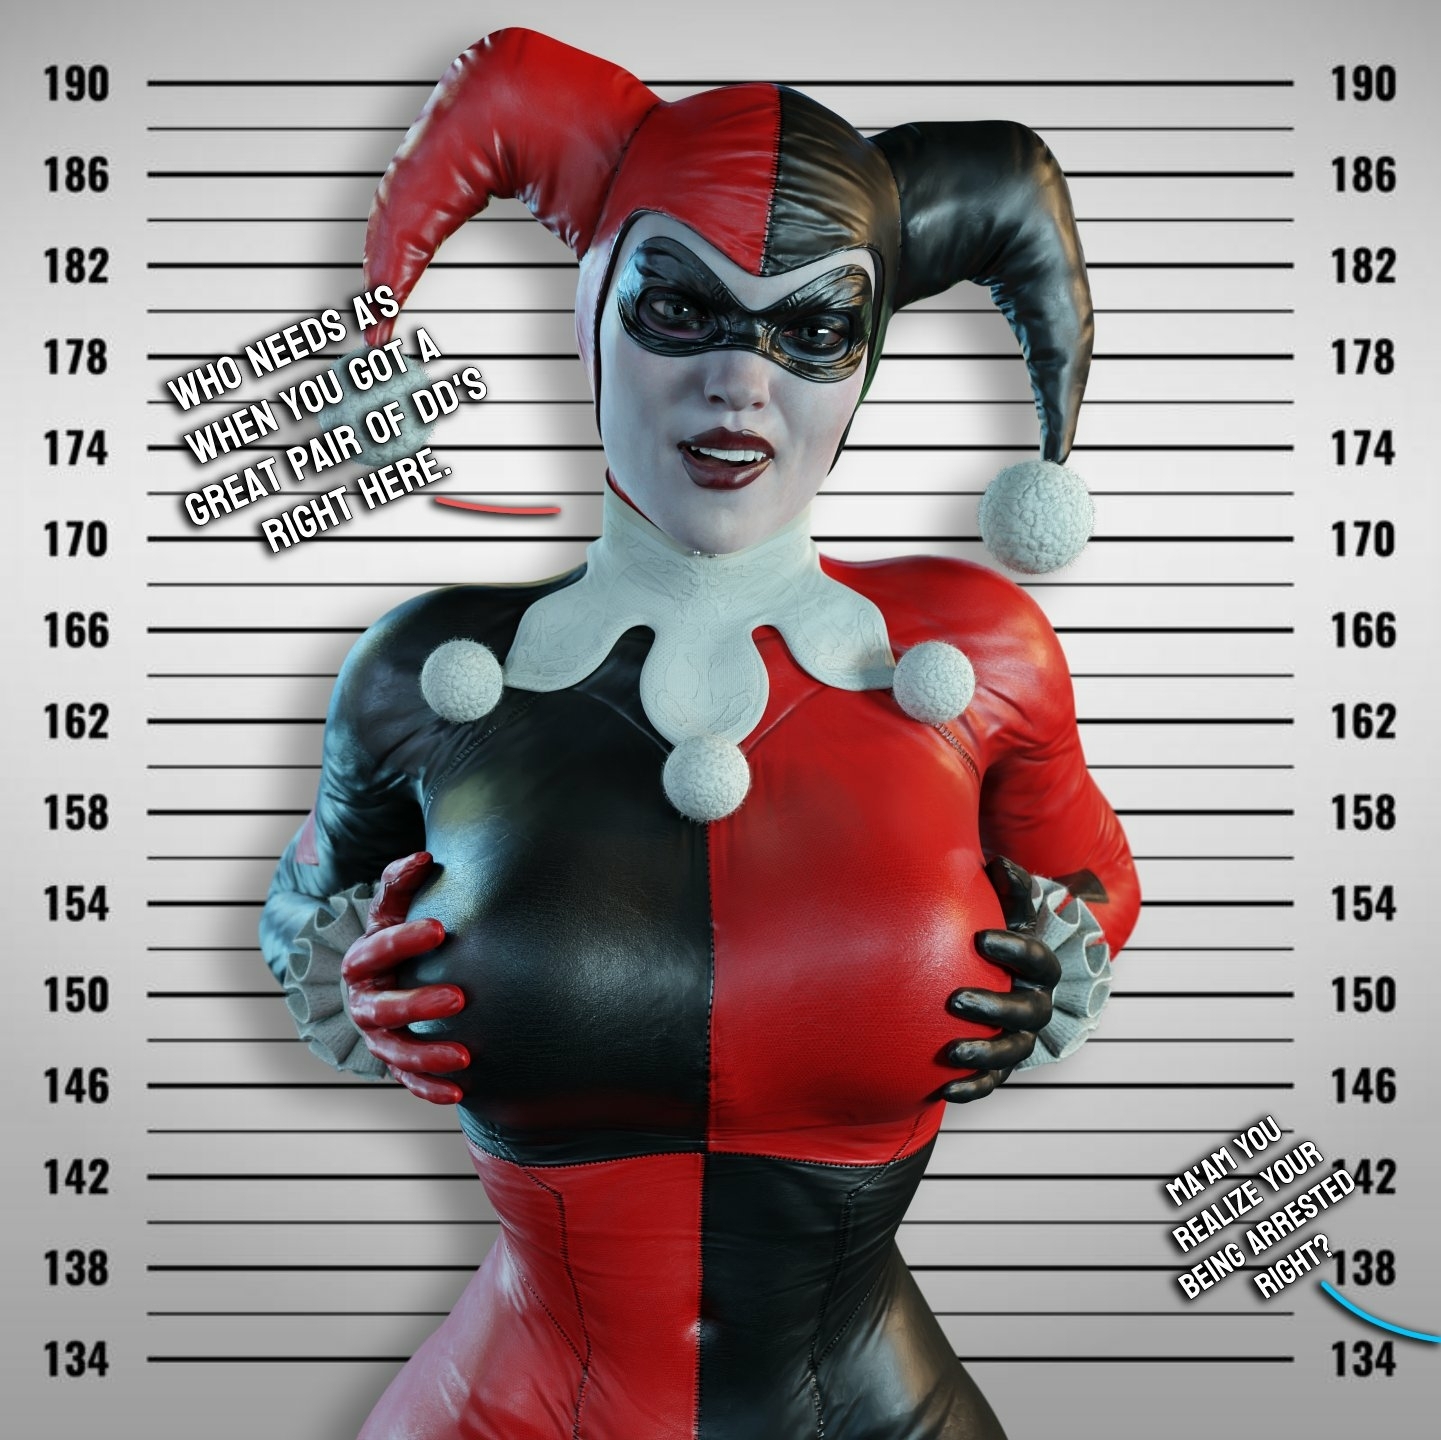 Harley s mugshot. Harley Quinn Suicide Squad Cake Boobs Big boobs Big Tits Horny Face Horny Sexy 3d Porn